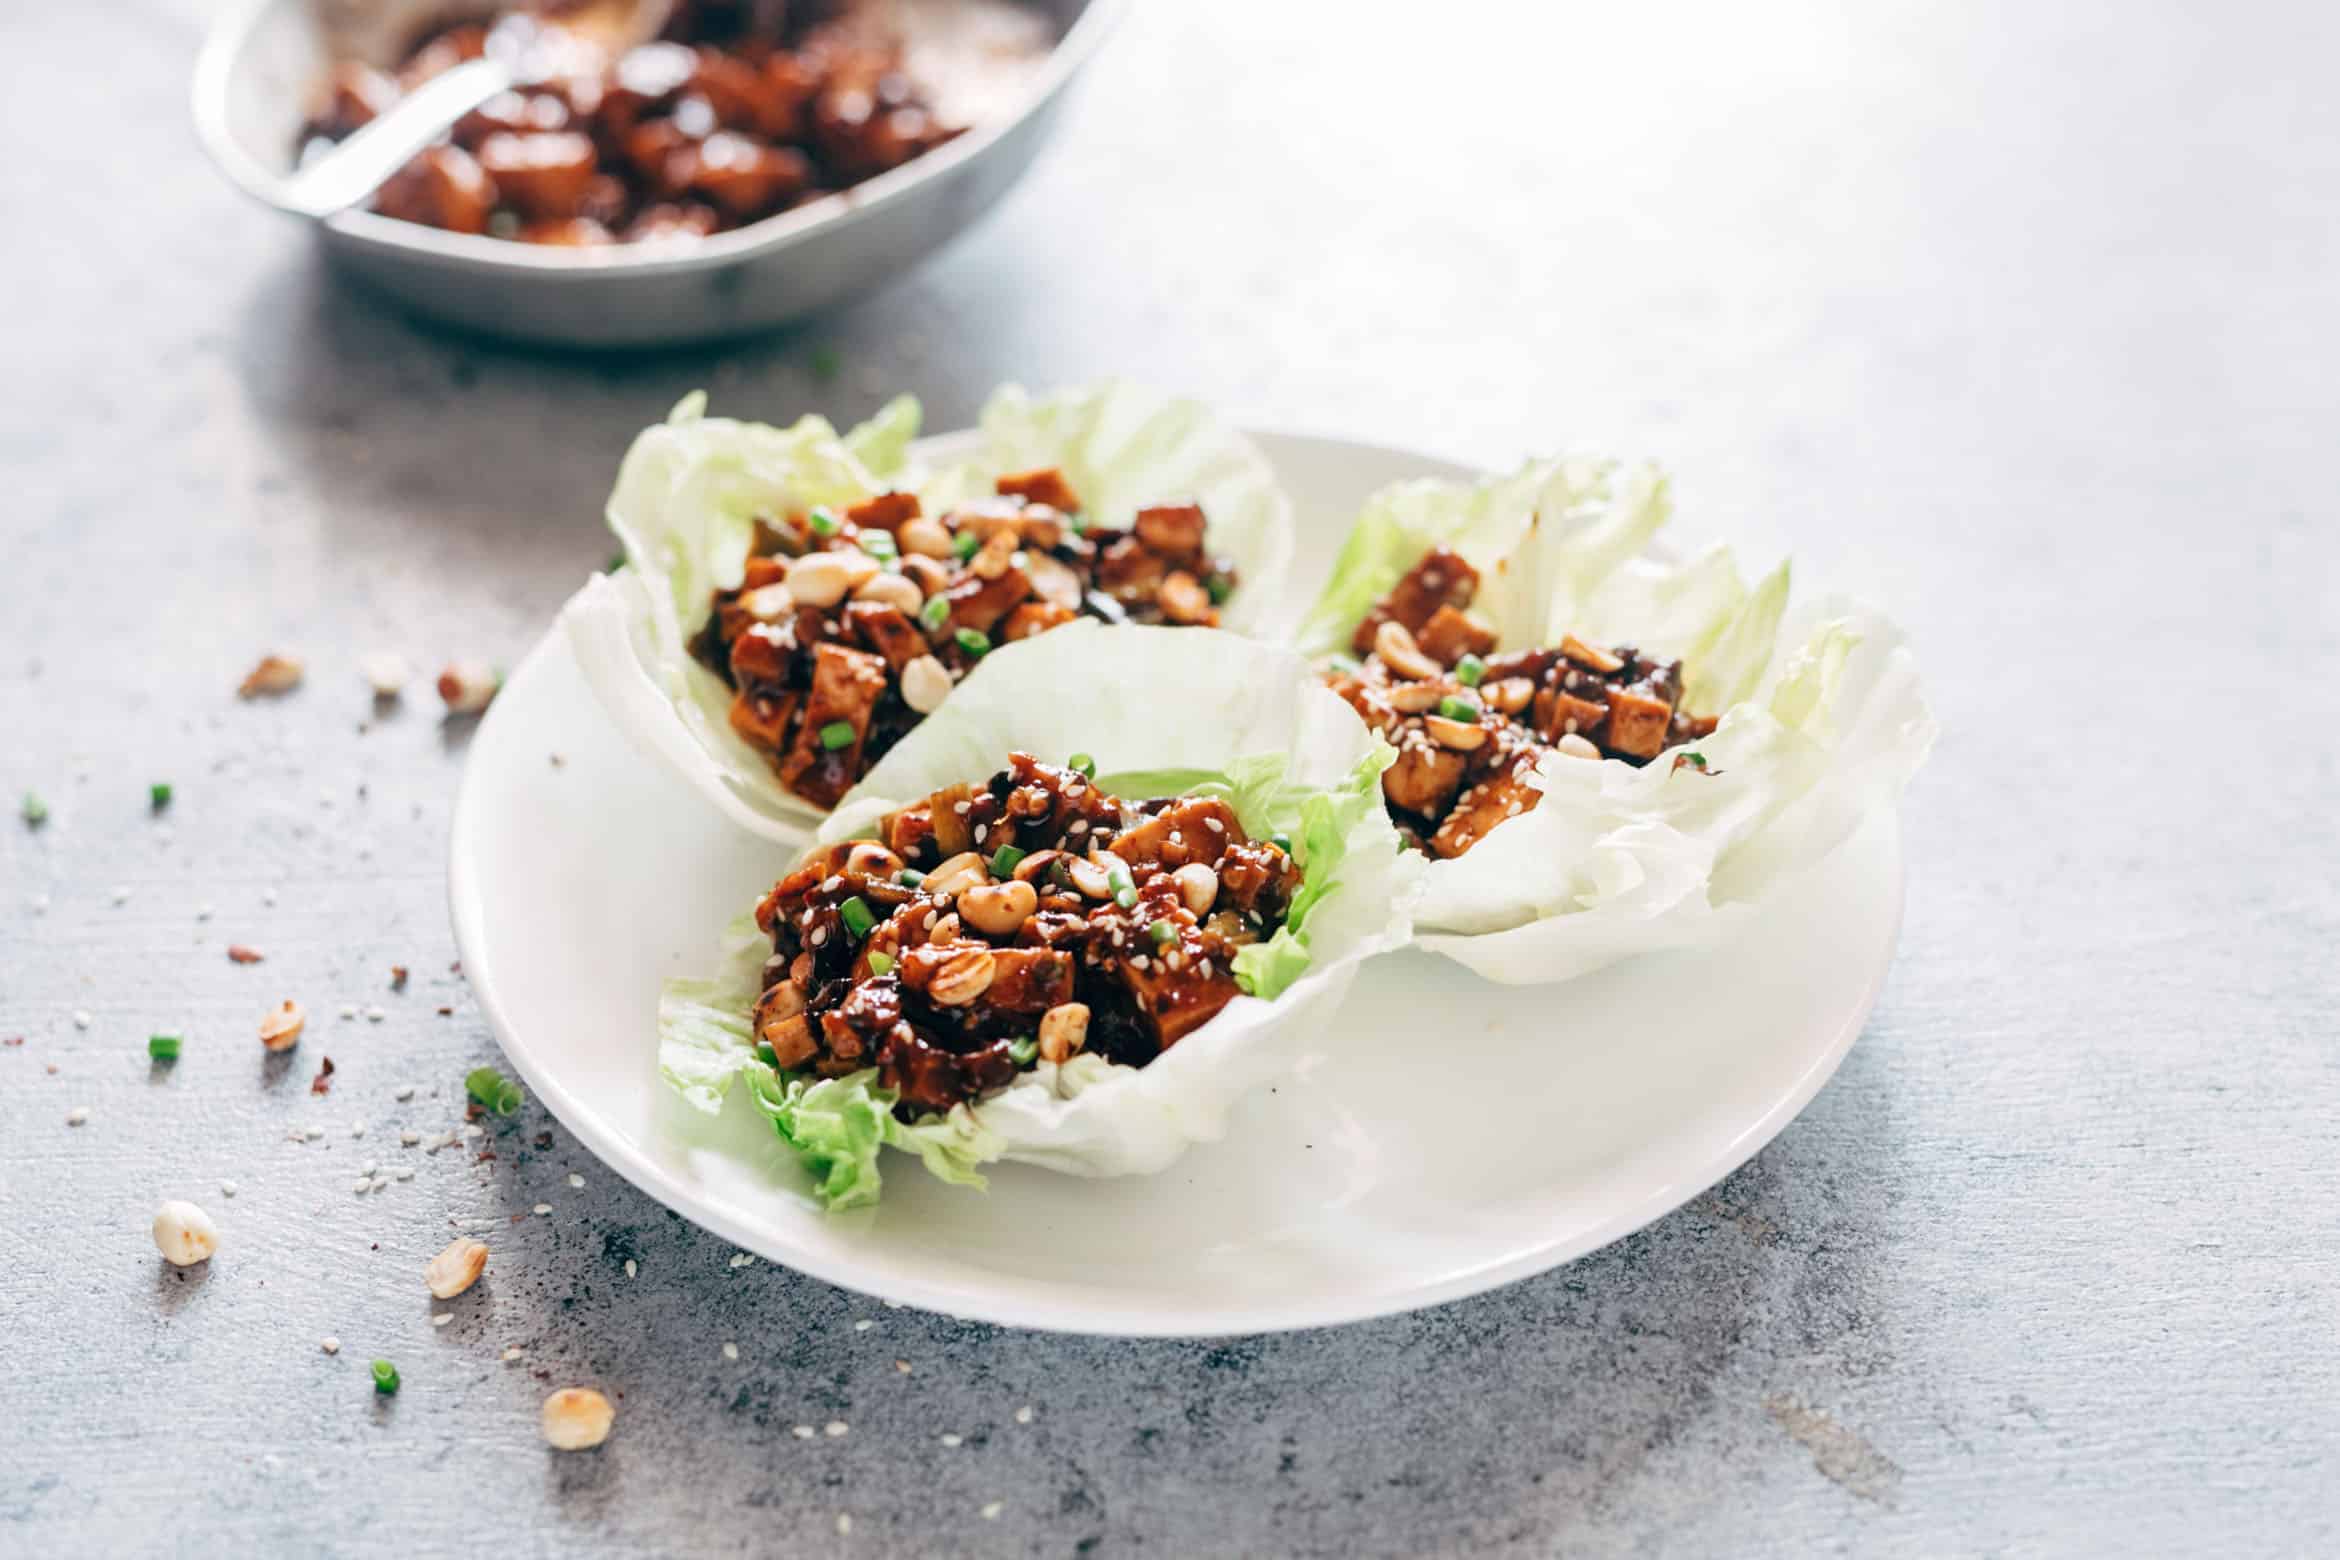 These vegetarian mapo tofu lettuce wraps double up as appetizer and dinner and use shiitake mushrooms instead of pork for that same great taste! Vegan and Gluten Free too.